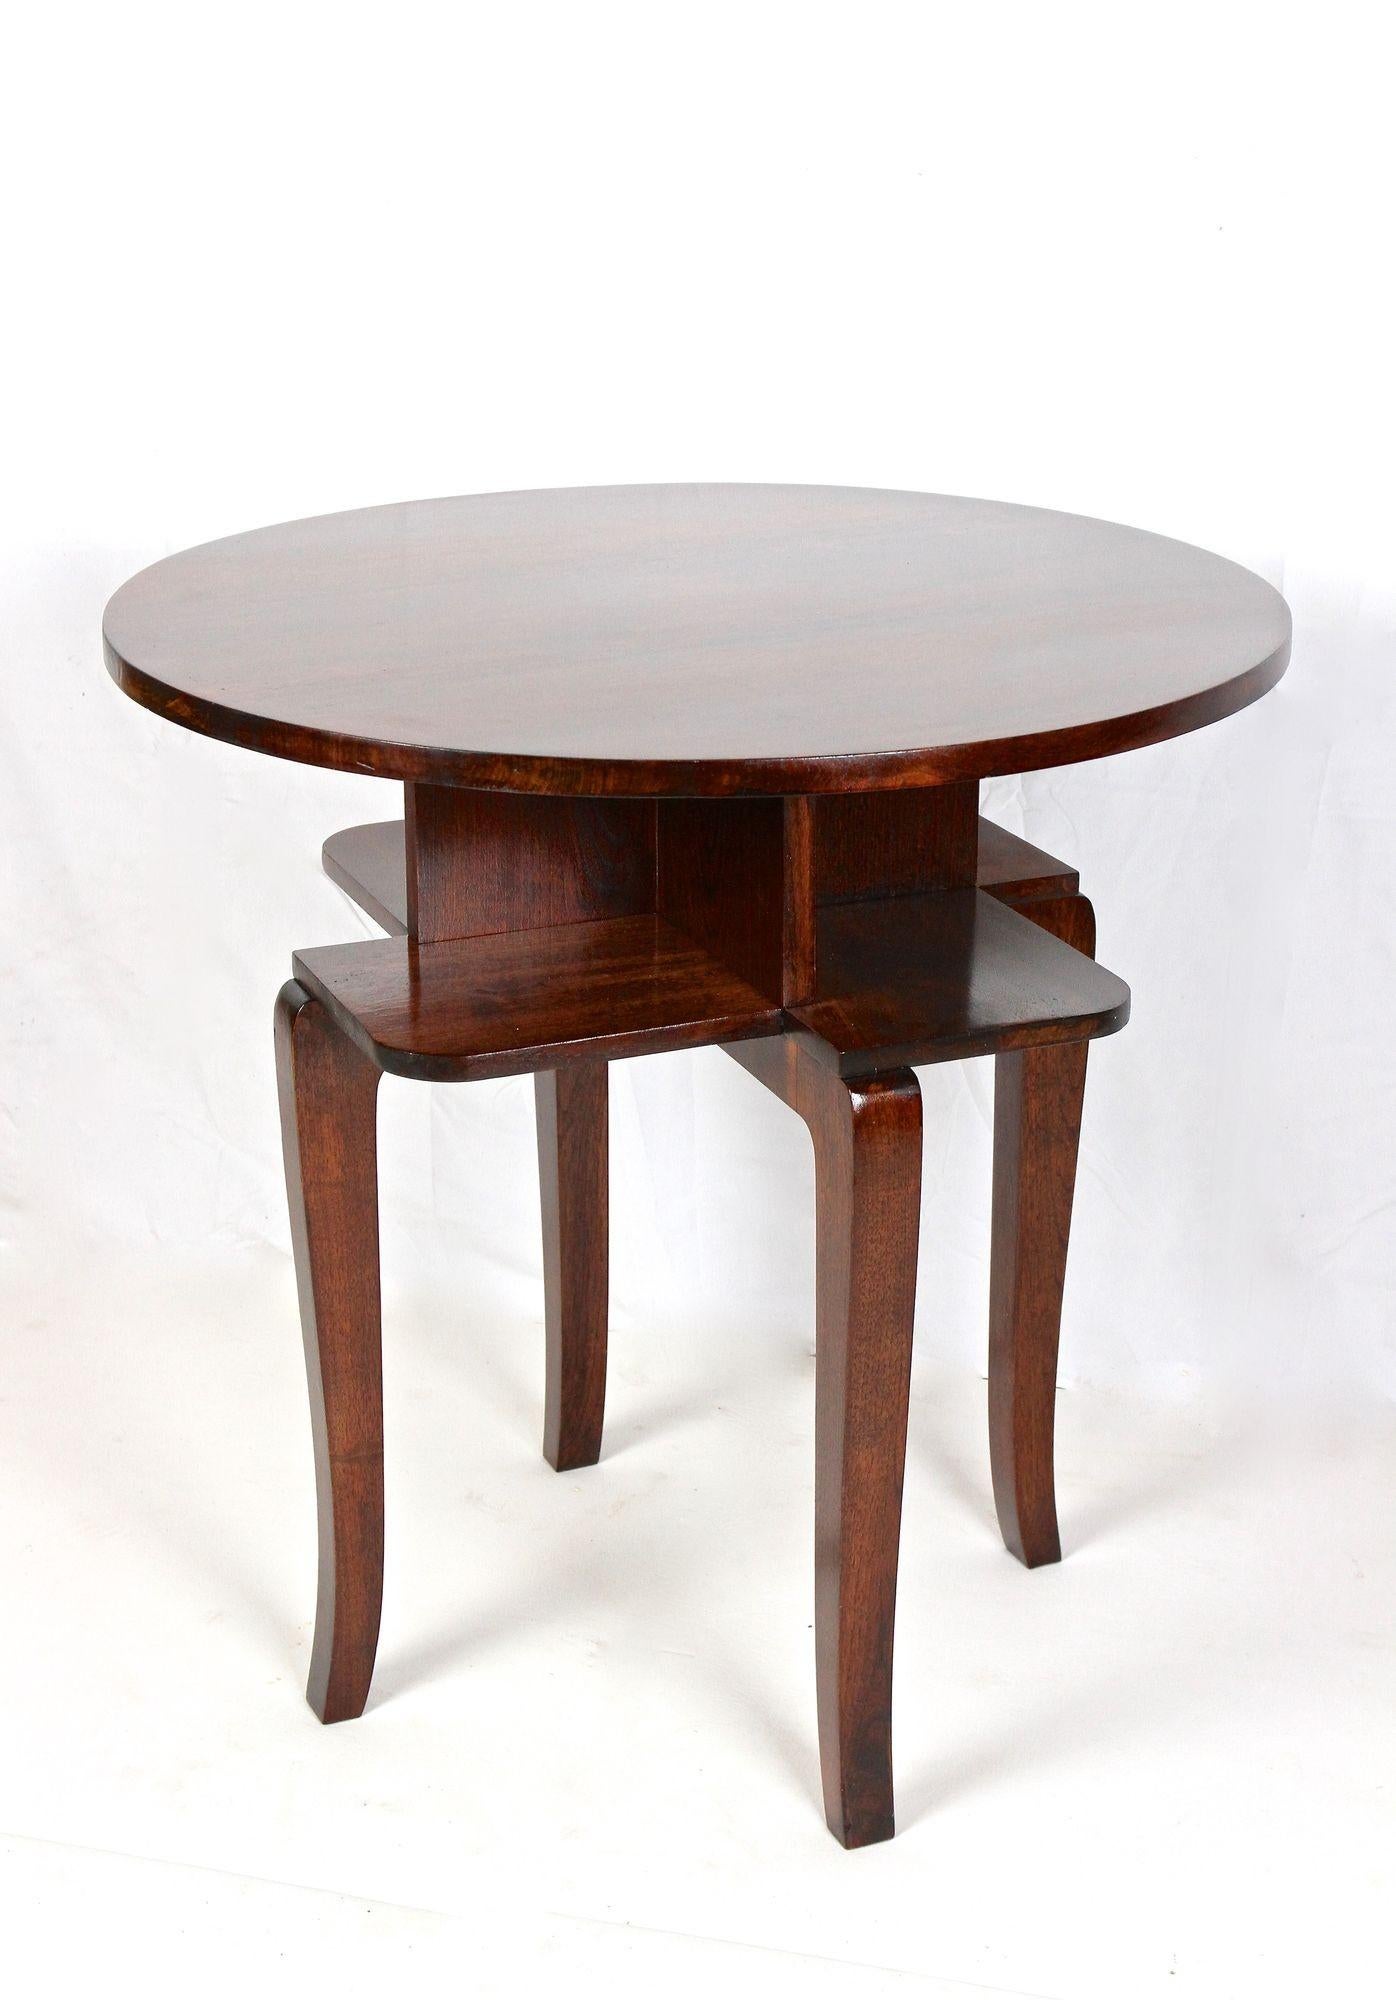 Round Art Deco Bentwood Side Table/ Coffee Table, Mahogany Style, AT ca. 1920 2